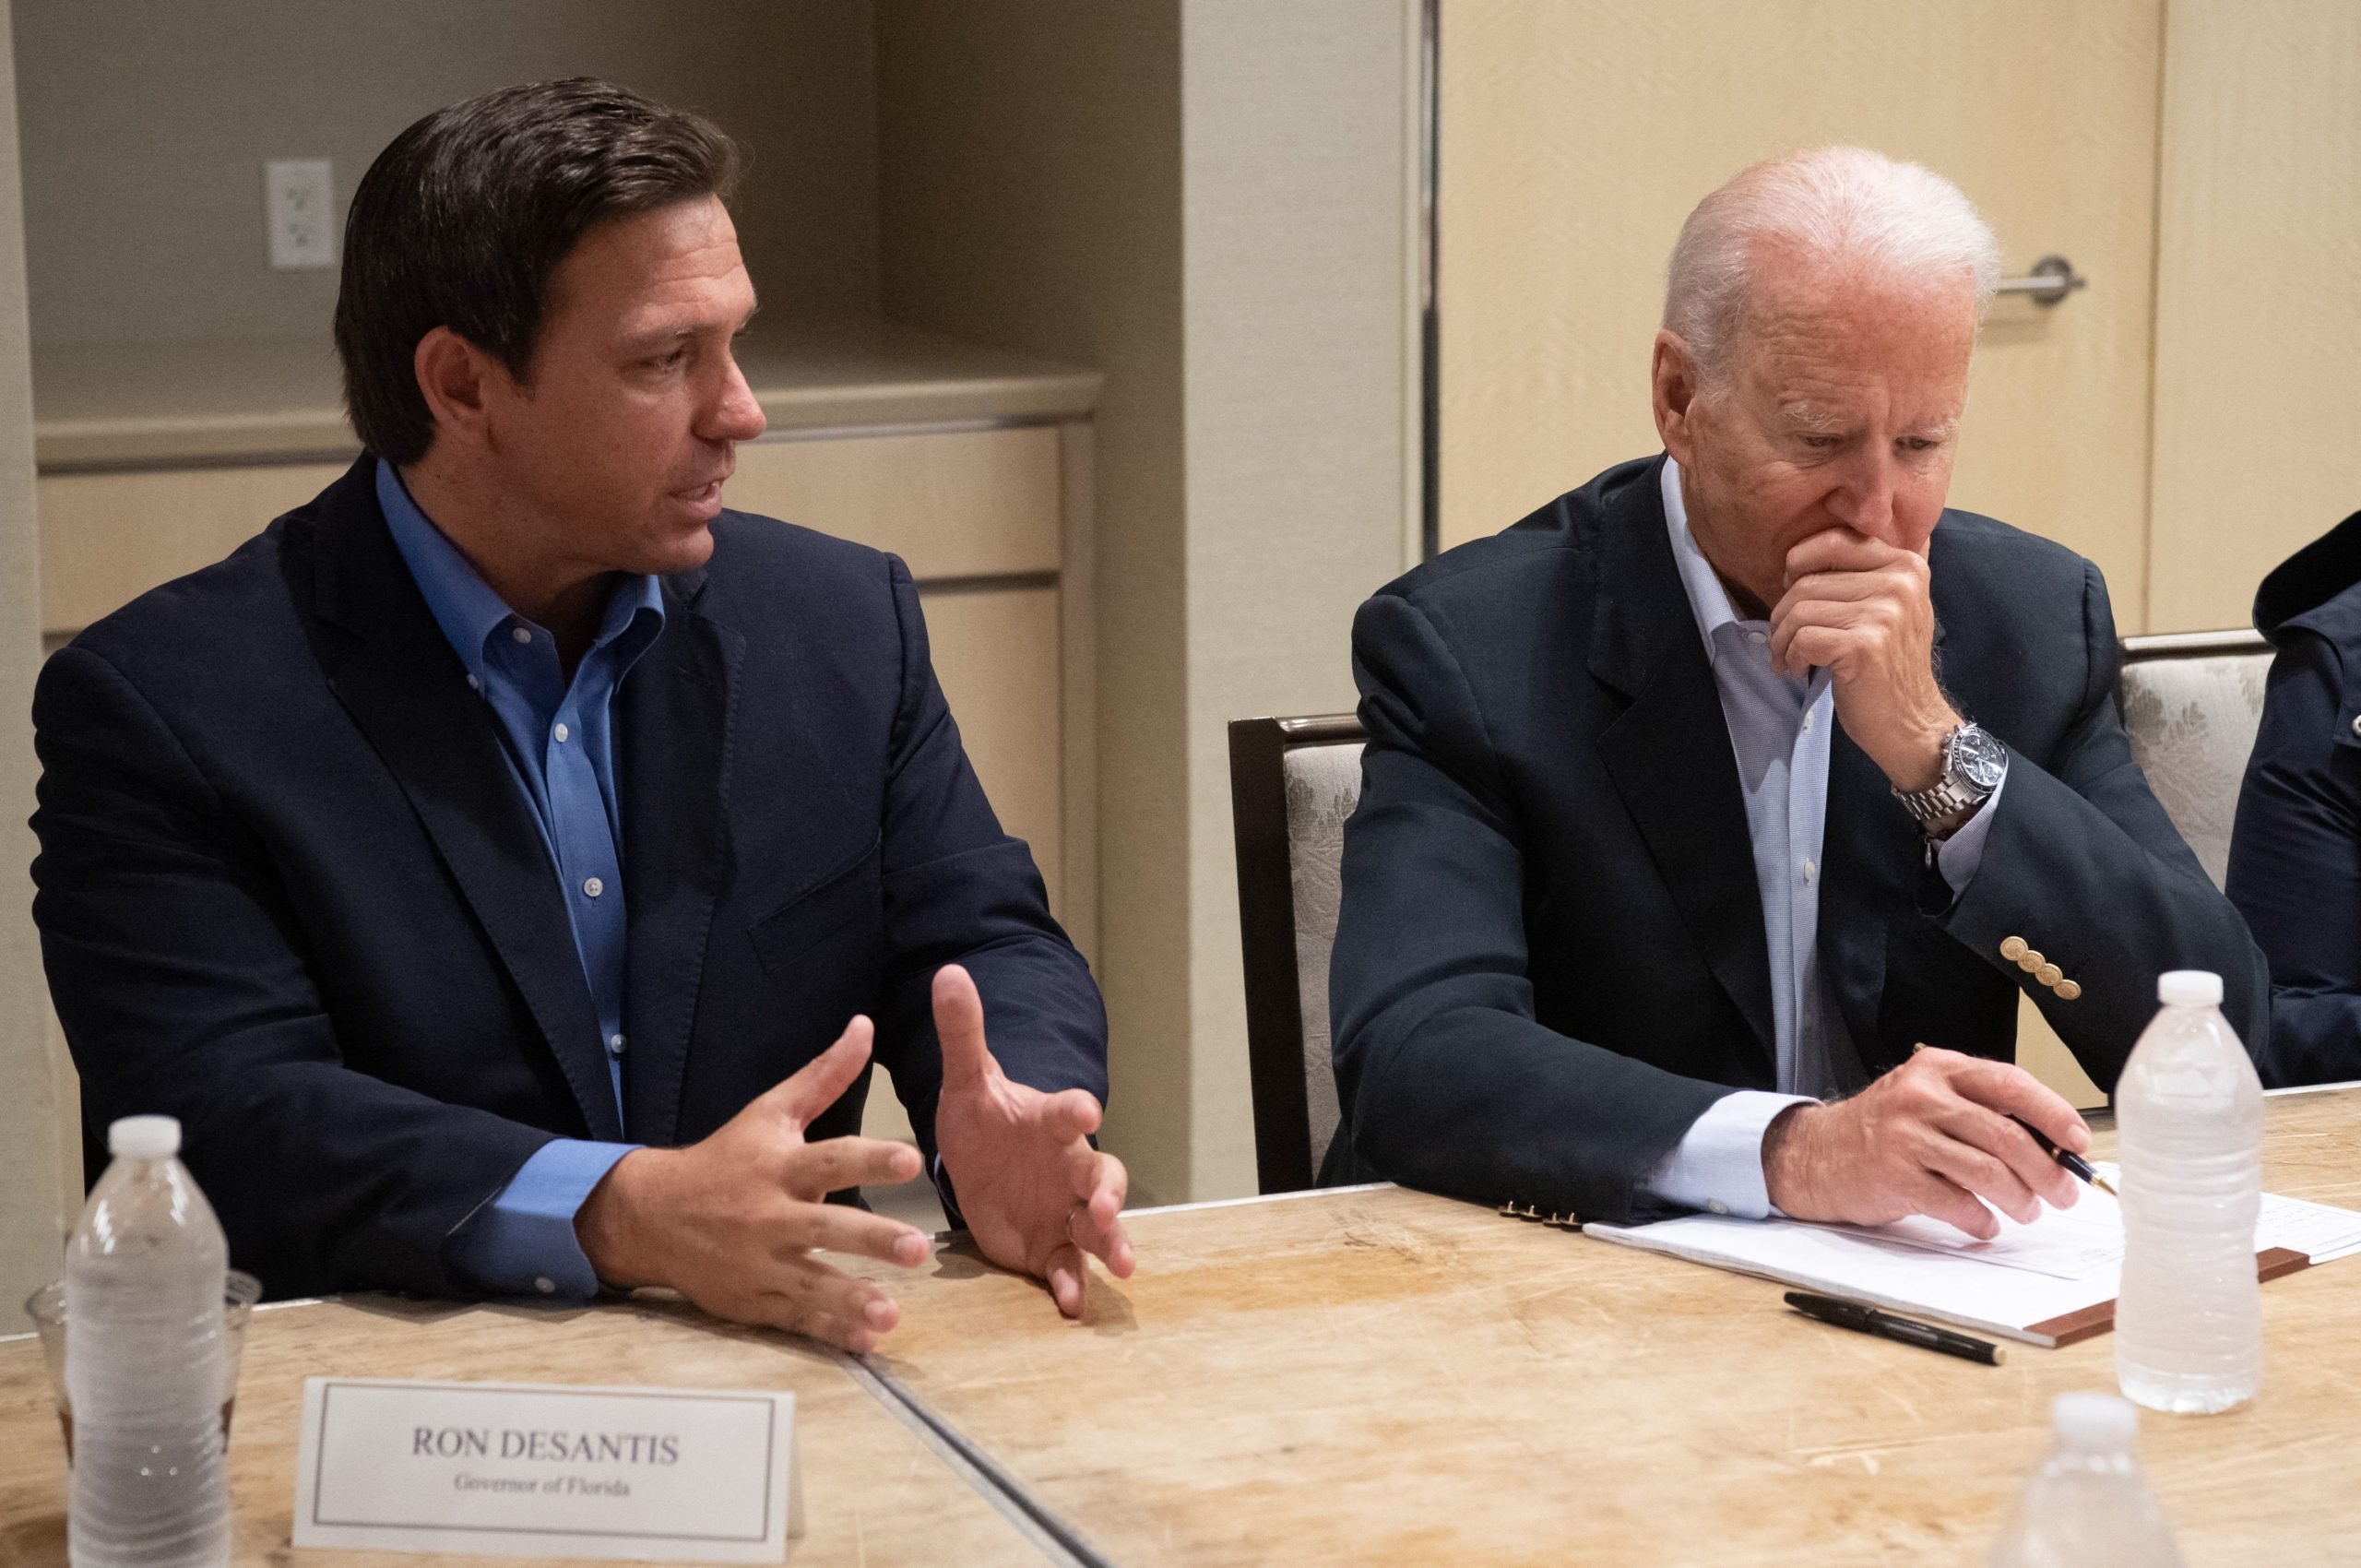 US President Joe Biden alongside Florida Governor Ron DeSantis (L) speaks about the collapse of the 12-story Champlain Towers South condo building in Surfside, during a briefing in Miami Beach, Florida, July 1, 2021. (Photo by SAUL LOEB/AFP via Getty Images)